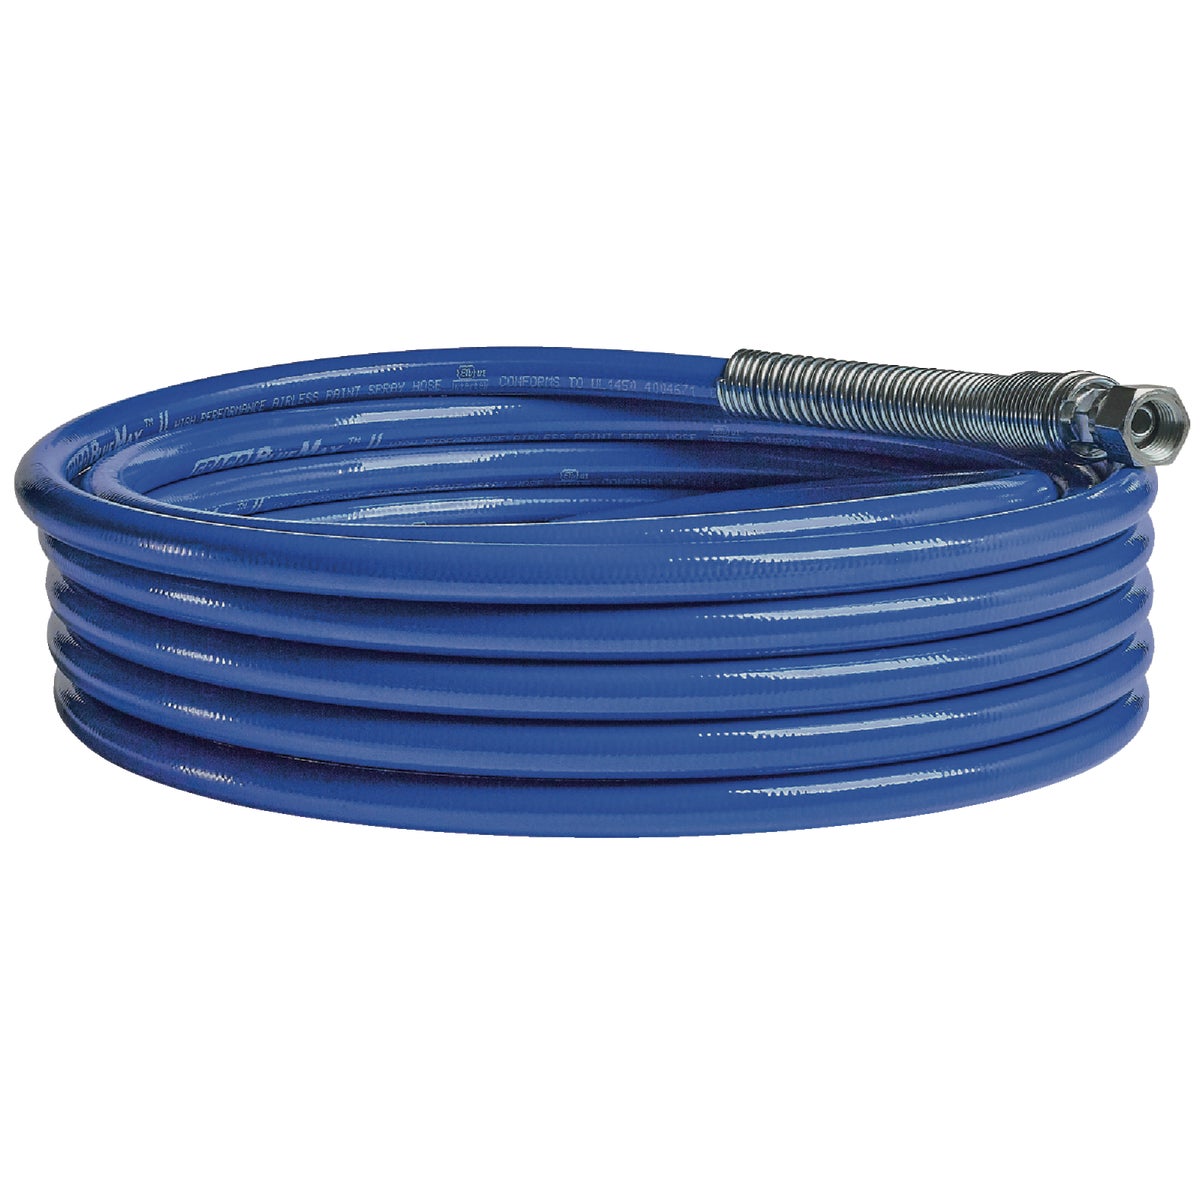 Graco 1/4 In. x 25 Ft. BlueMax II Airless Sprayer Hose